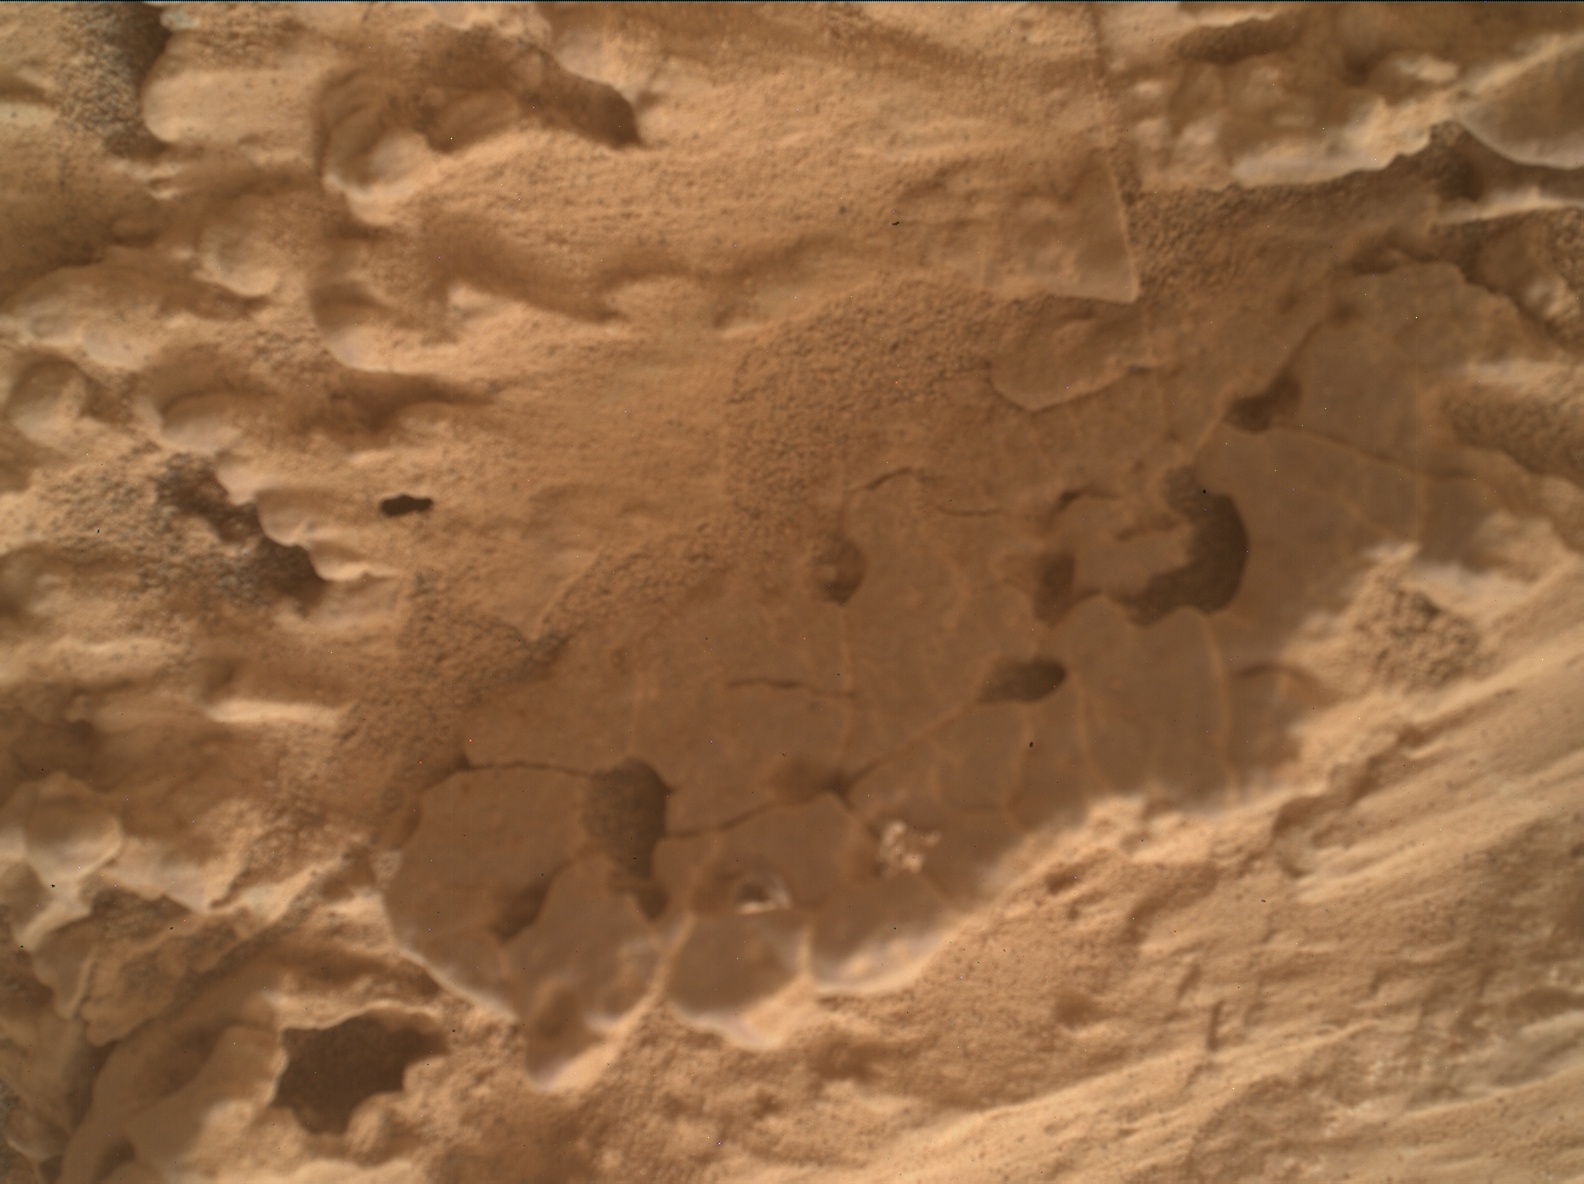 Nasa's Mars rover Curiosity acquired this image using its Mars Hand Lens Imager (MAHLI) on Sol 3491